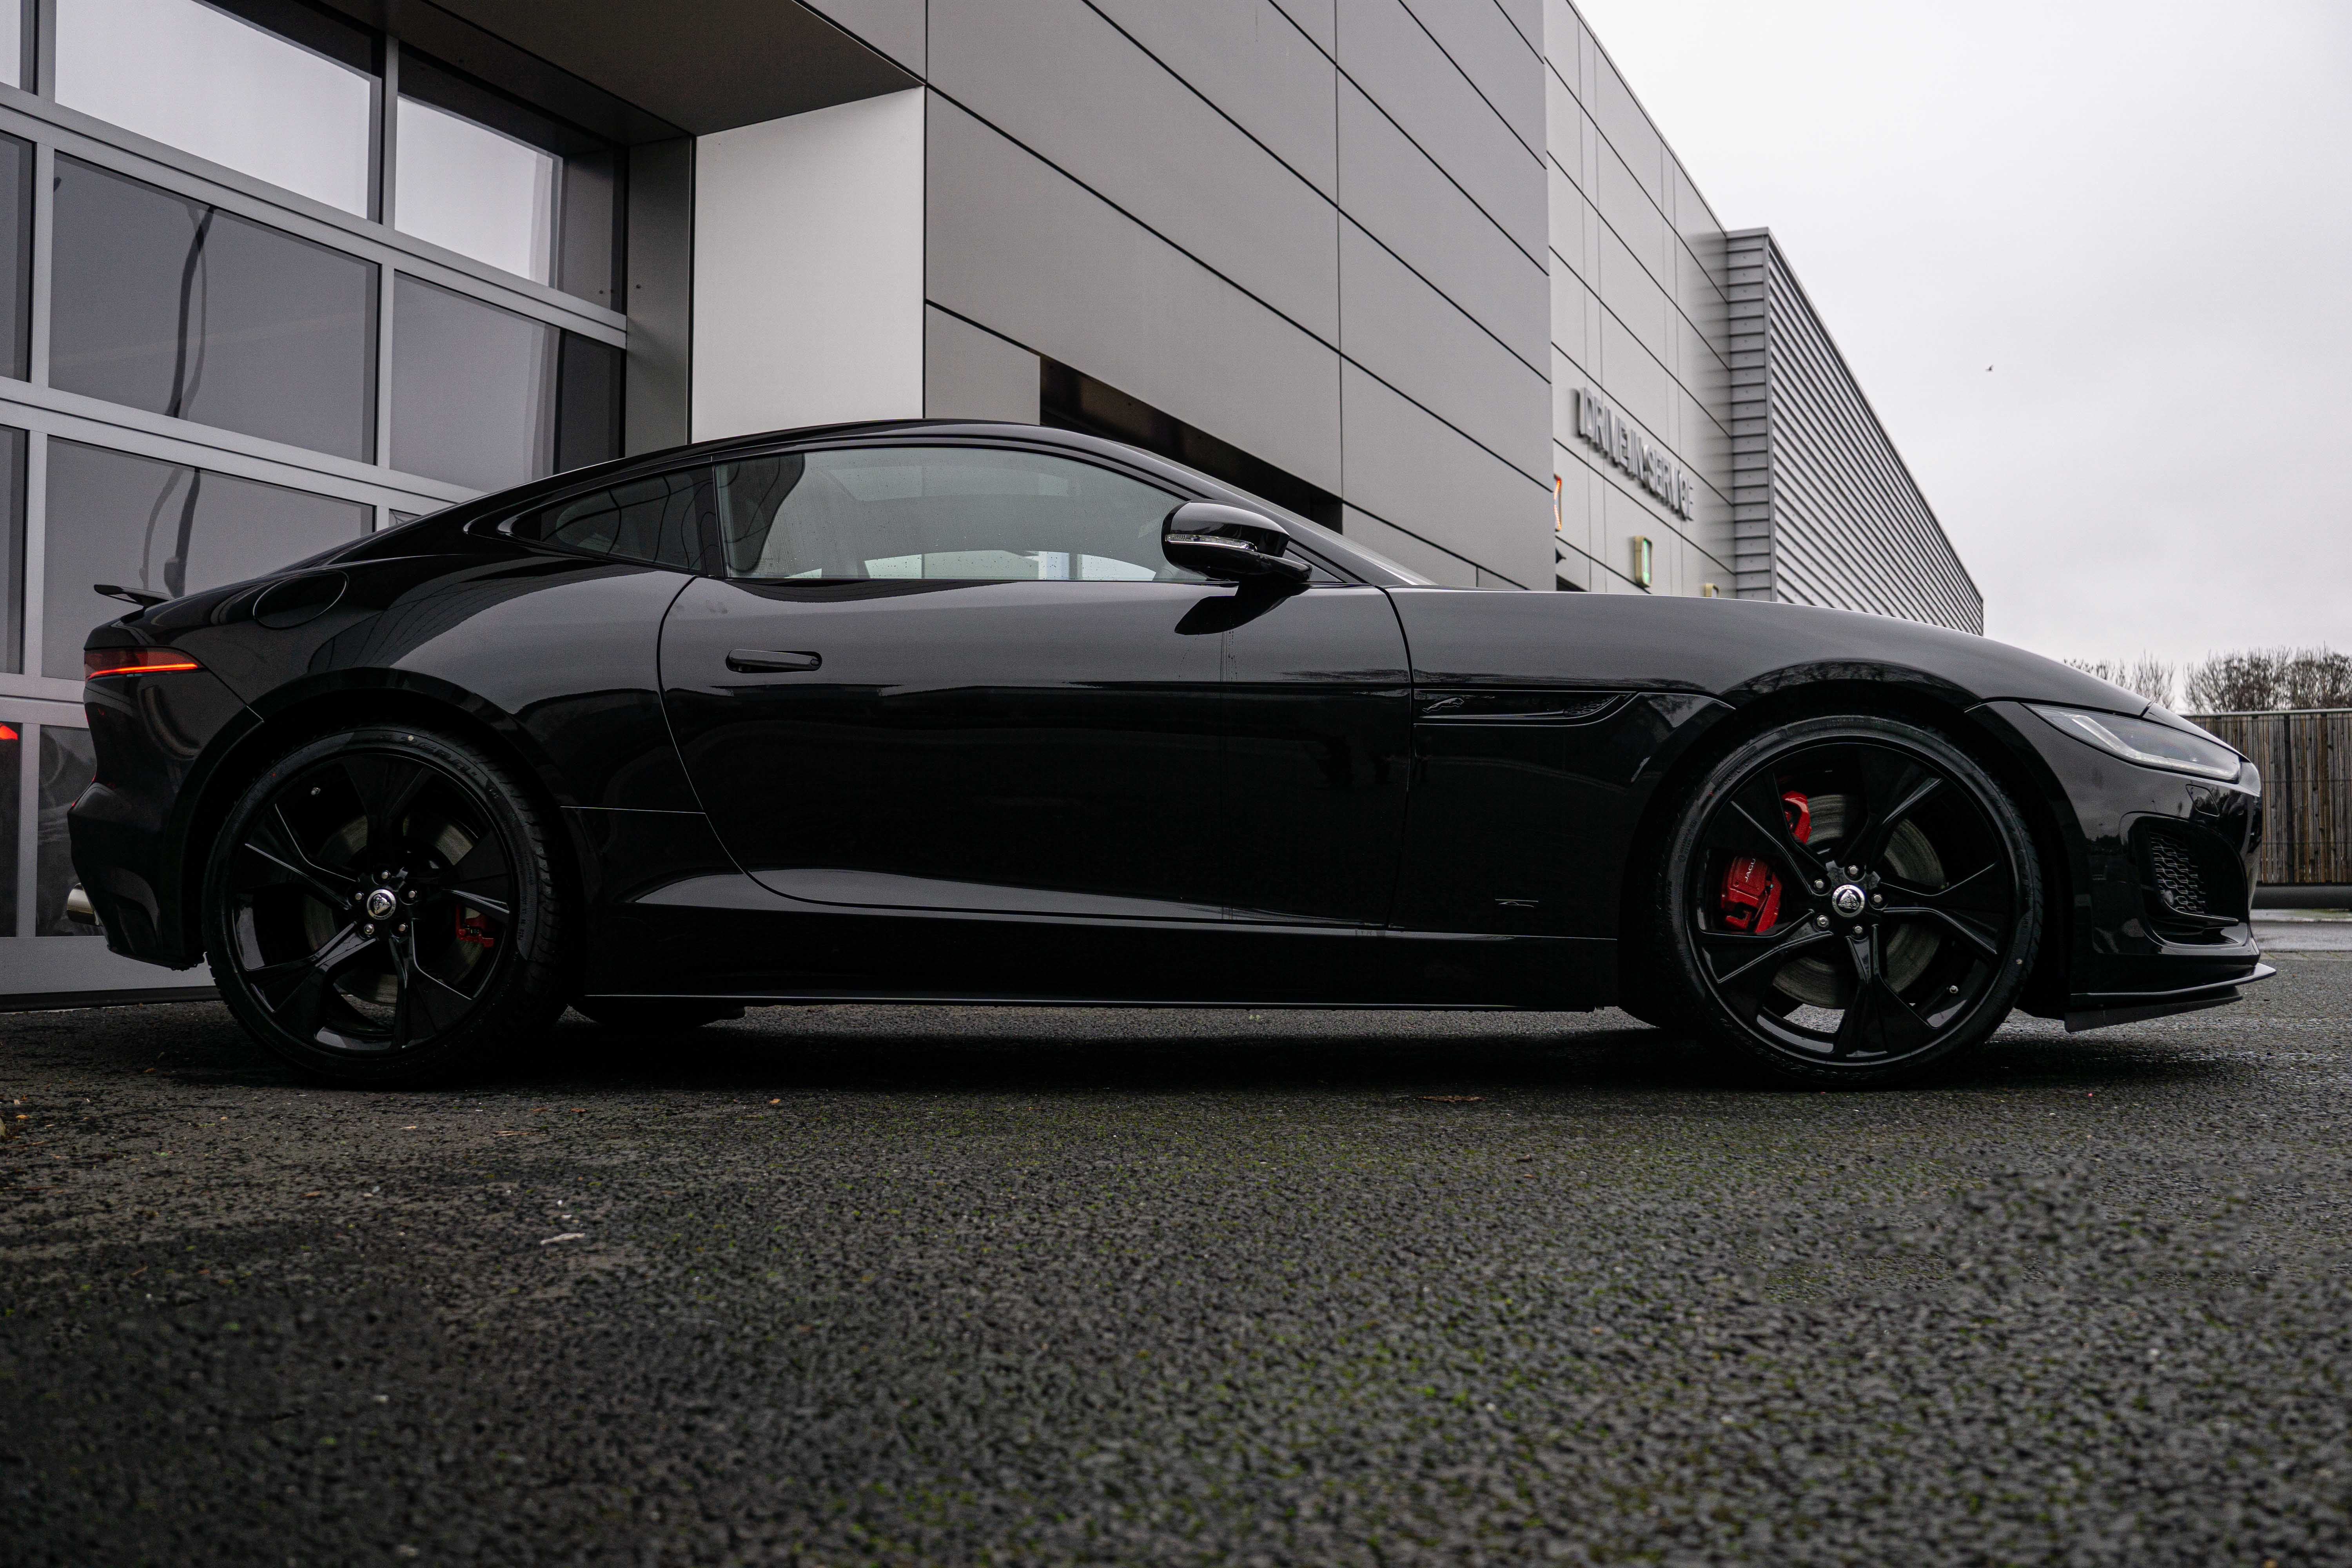 F-TYPE 5.0 P450 SUPERCHARGED V8 75 PLUS 2DR AUTO COUPE